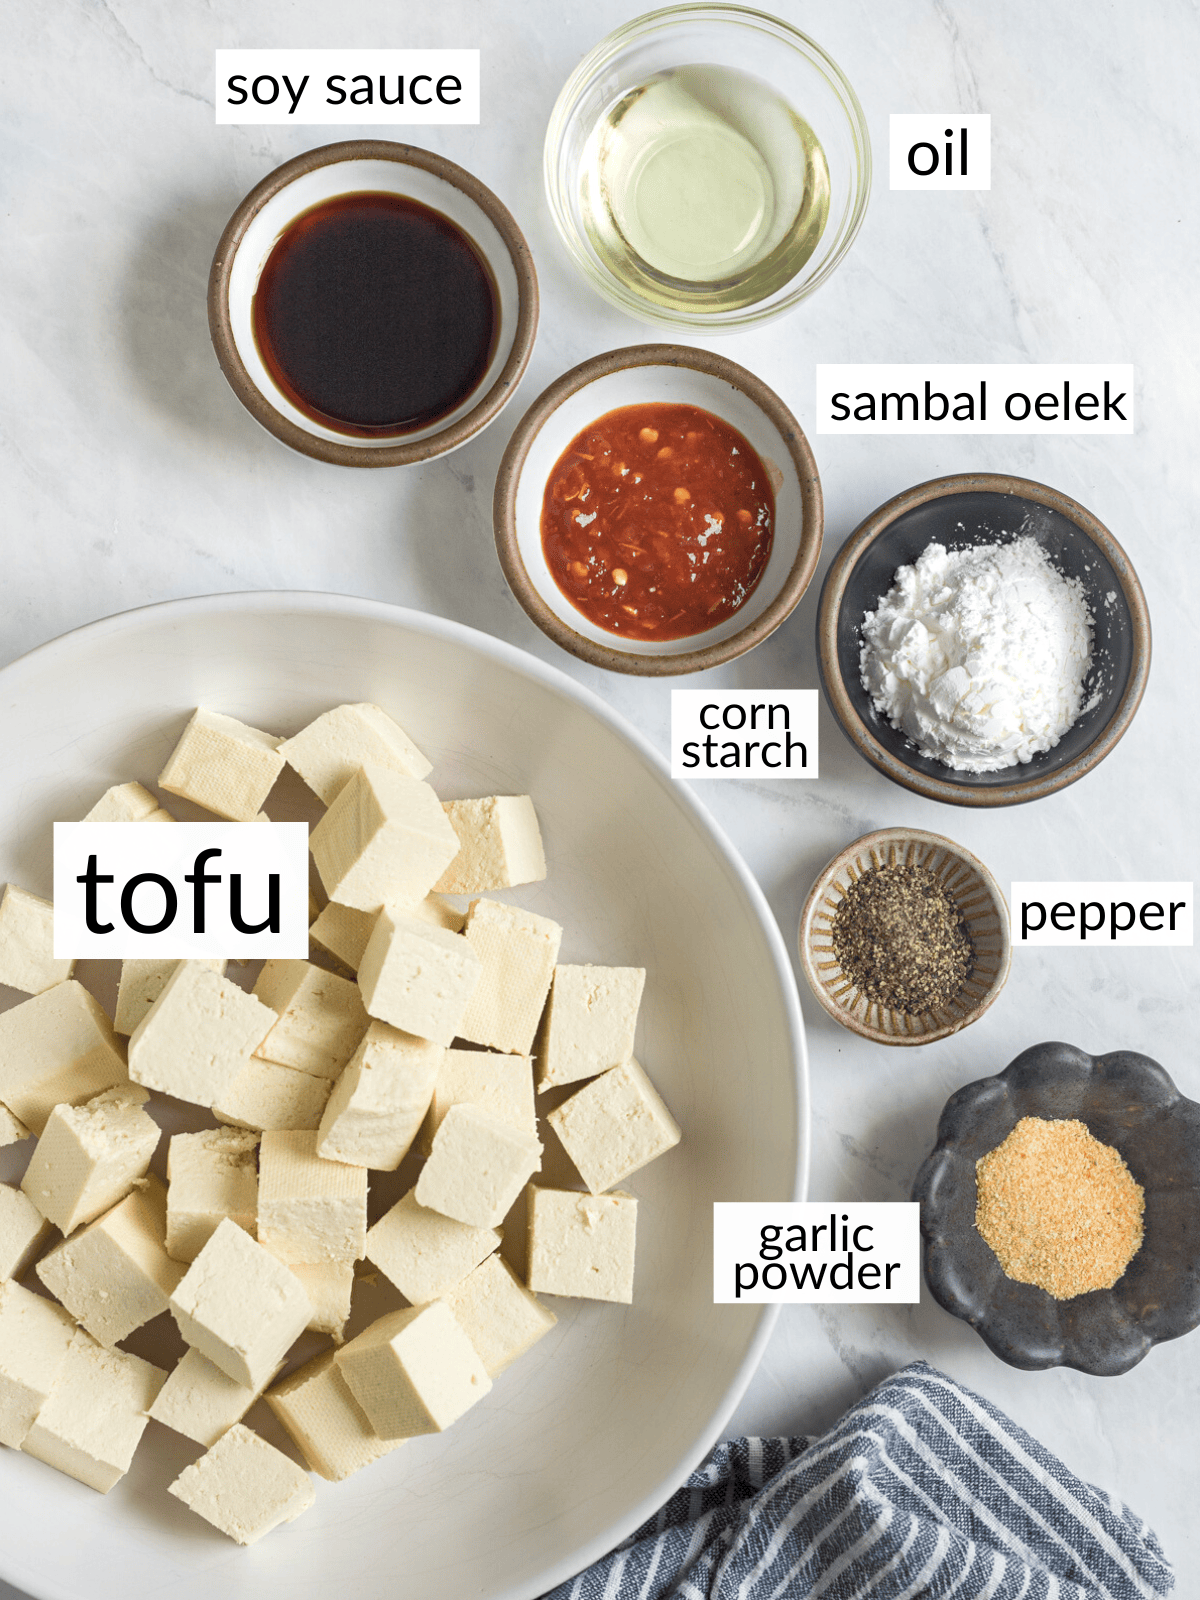 Ingredients for pan-fried tofu in individual bowls on a white counter top.